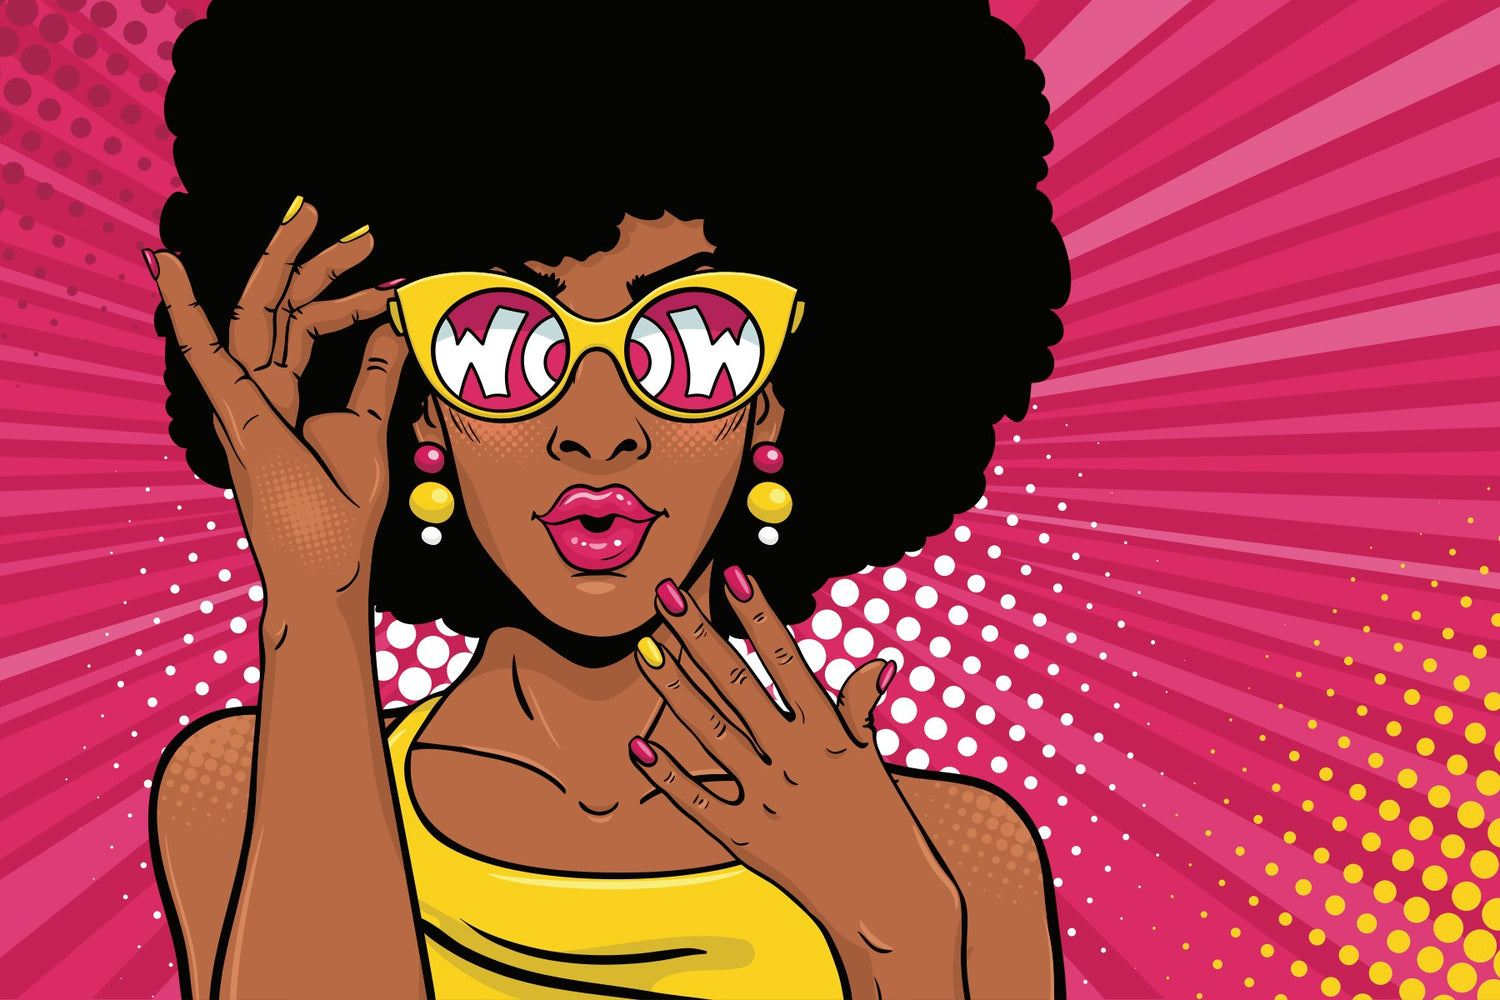 Hot pink pop art starburst back ground.  Women with black hair, hot pink lips, looking happy and surprised.  She wears a yellow vest, yellow earrings and yellow framed sunglasses with hot pink frames.  The lenses display the word WOW in white writing. 